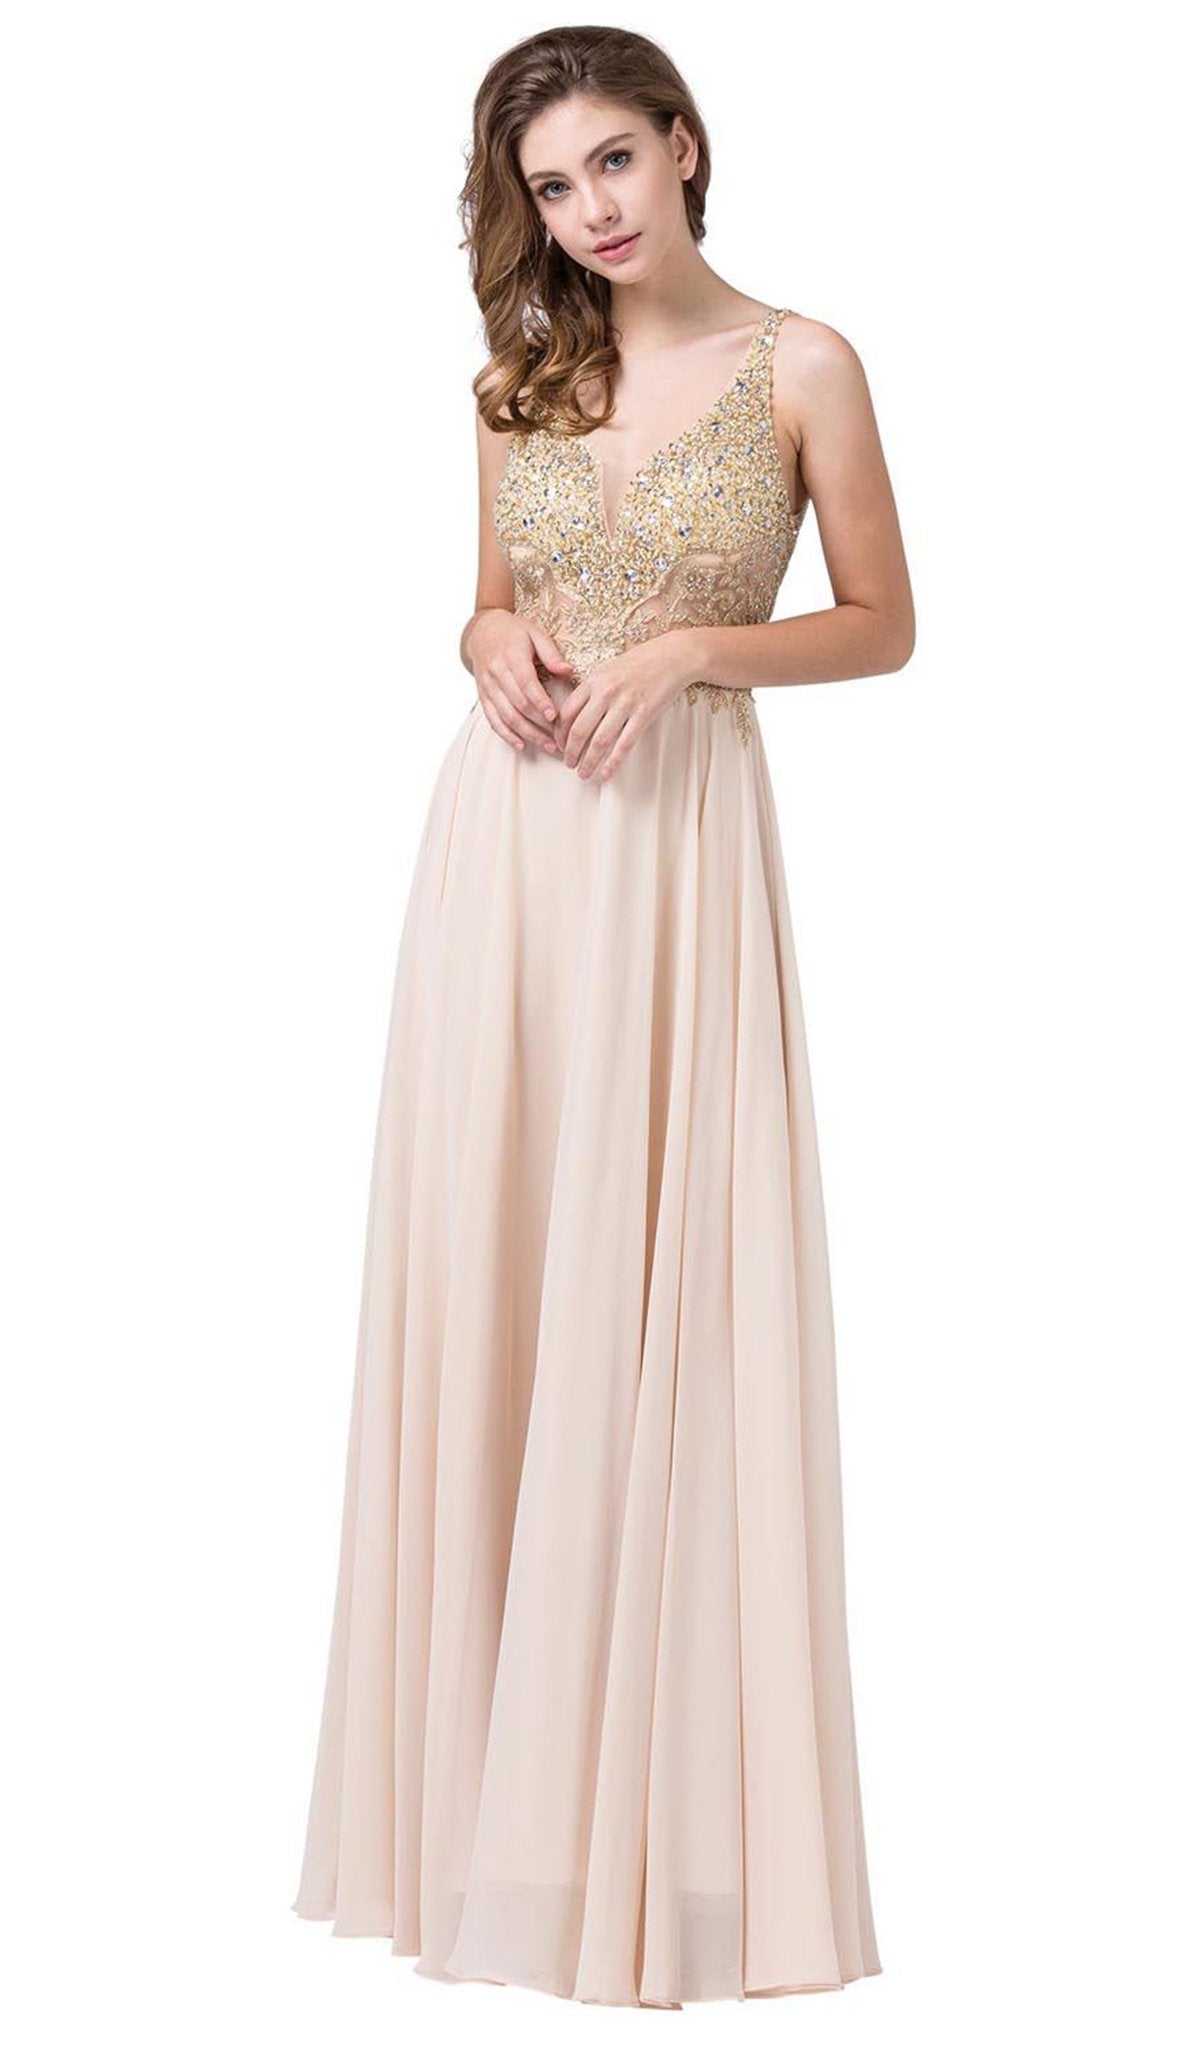 Dancing Queen - 2494 Jewel Encrusted Bodice A-Line Chiffon Gown In Neutral